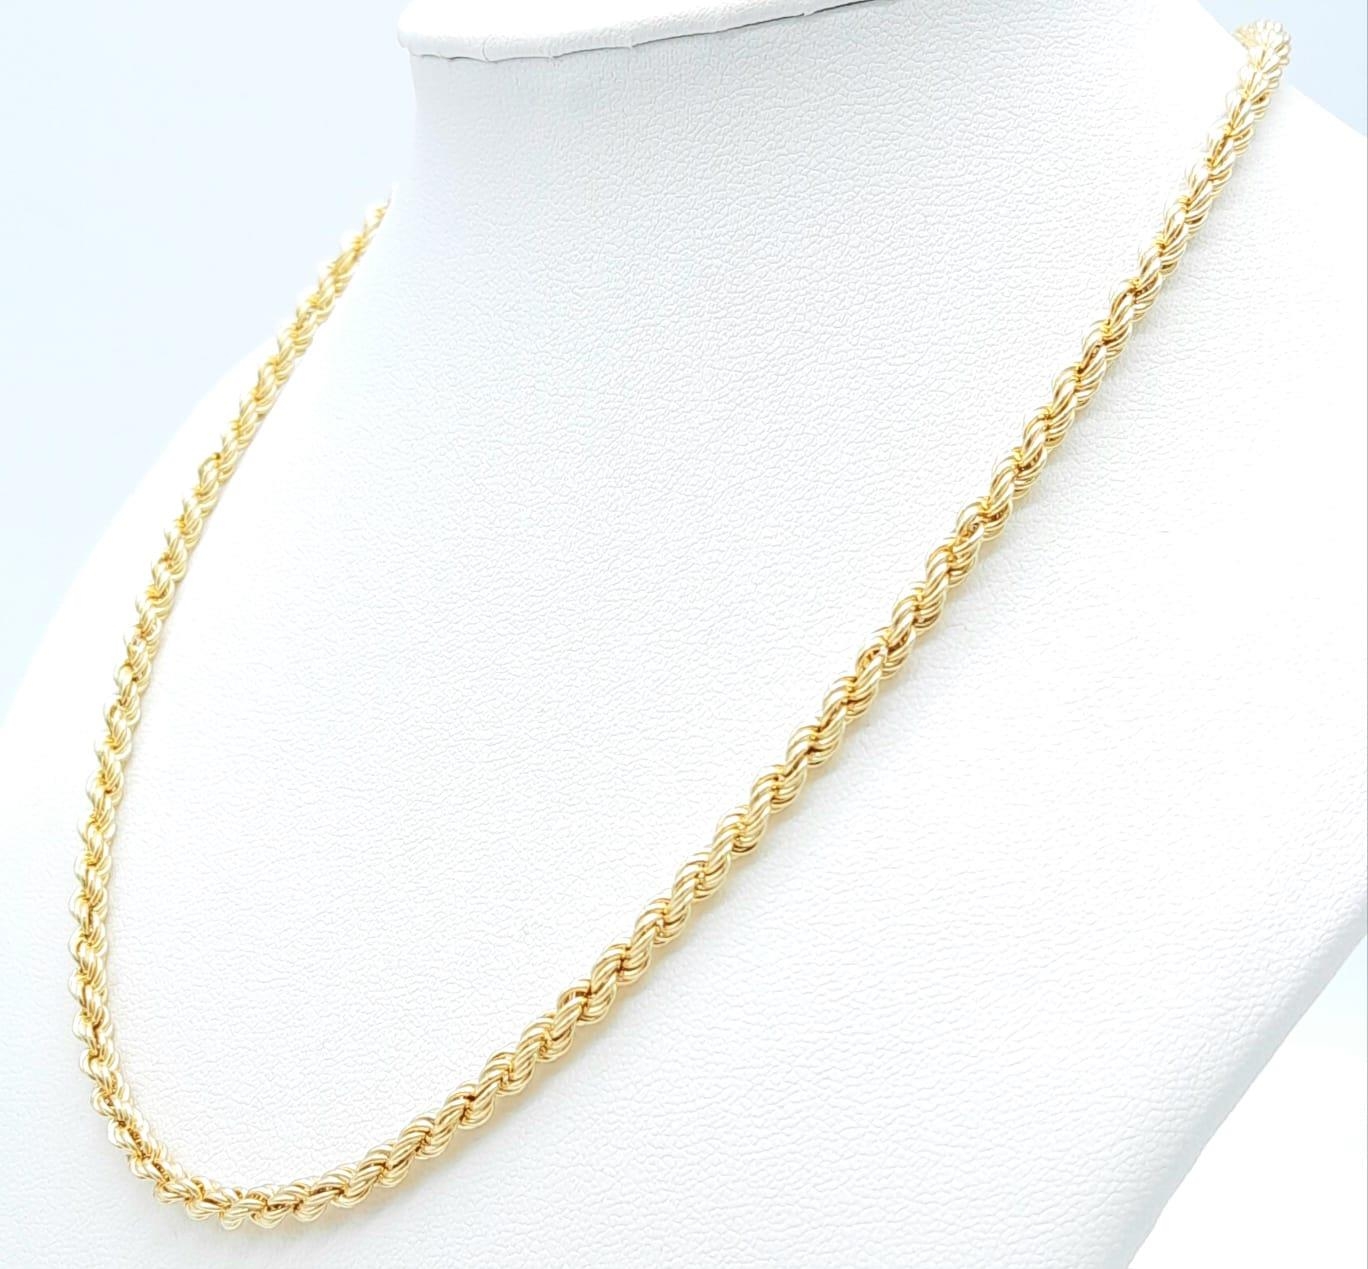 A 9K Yellow Gold Rope Necklace. 40cm length. 4.65g weight. - Image 3 of 5